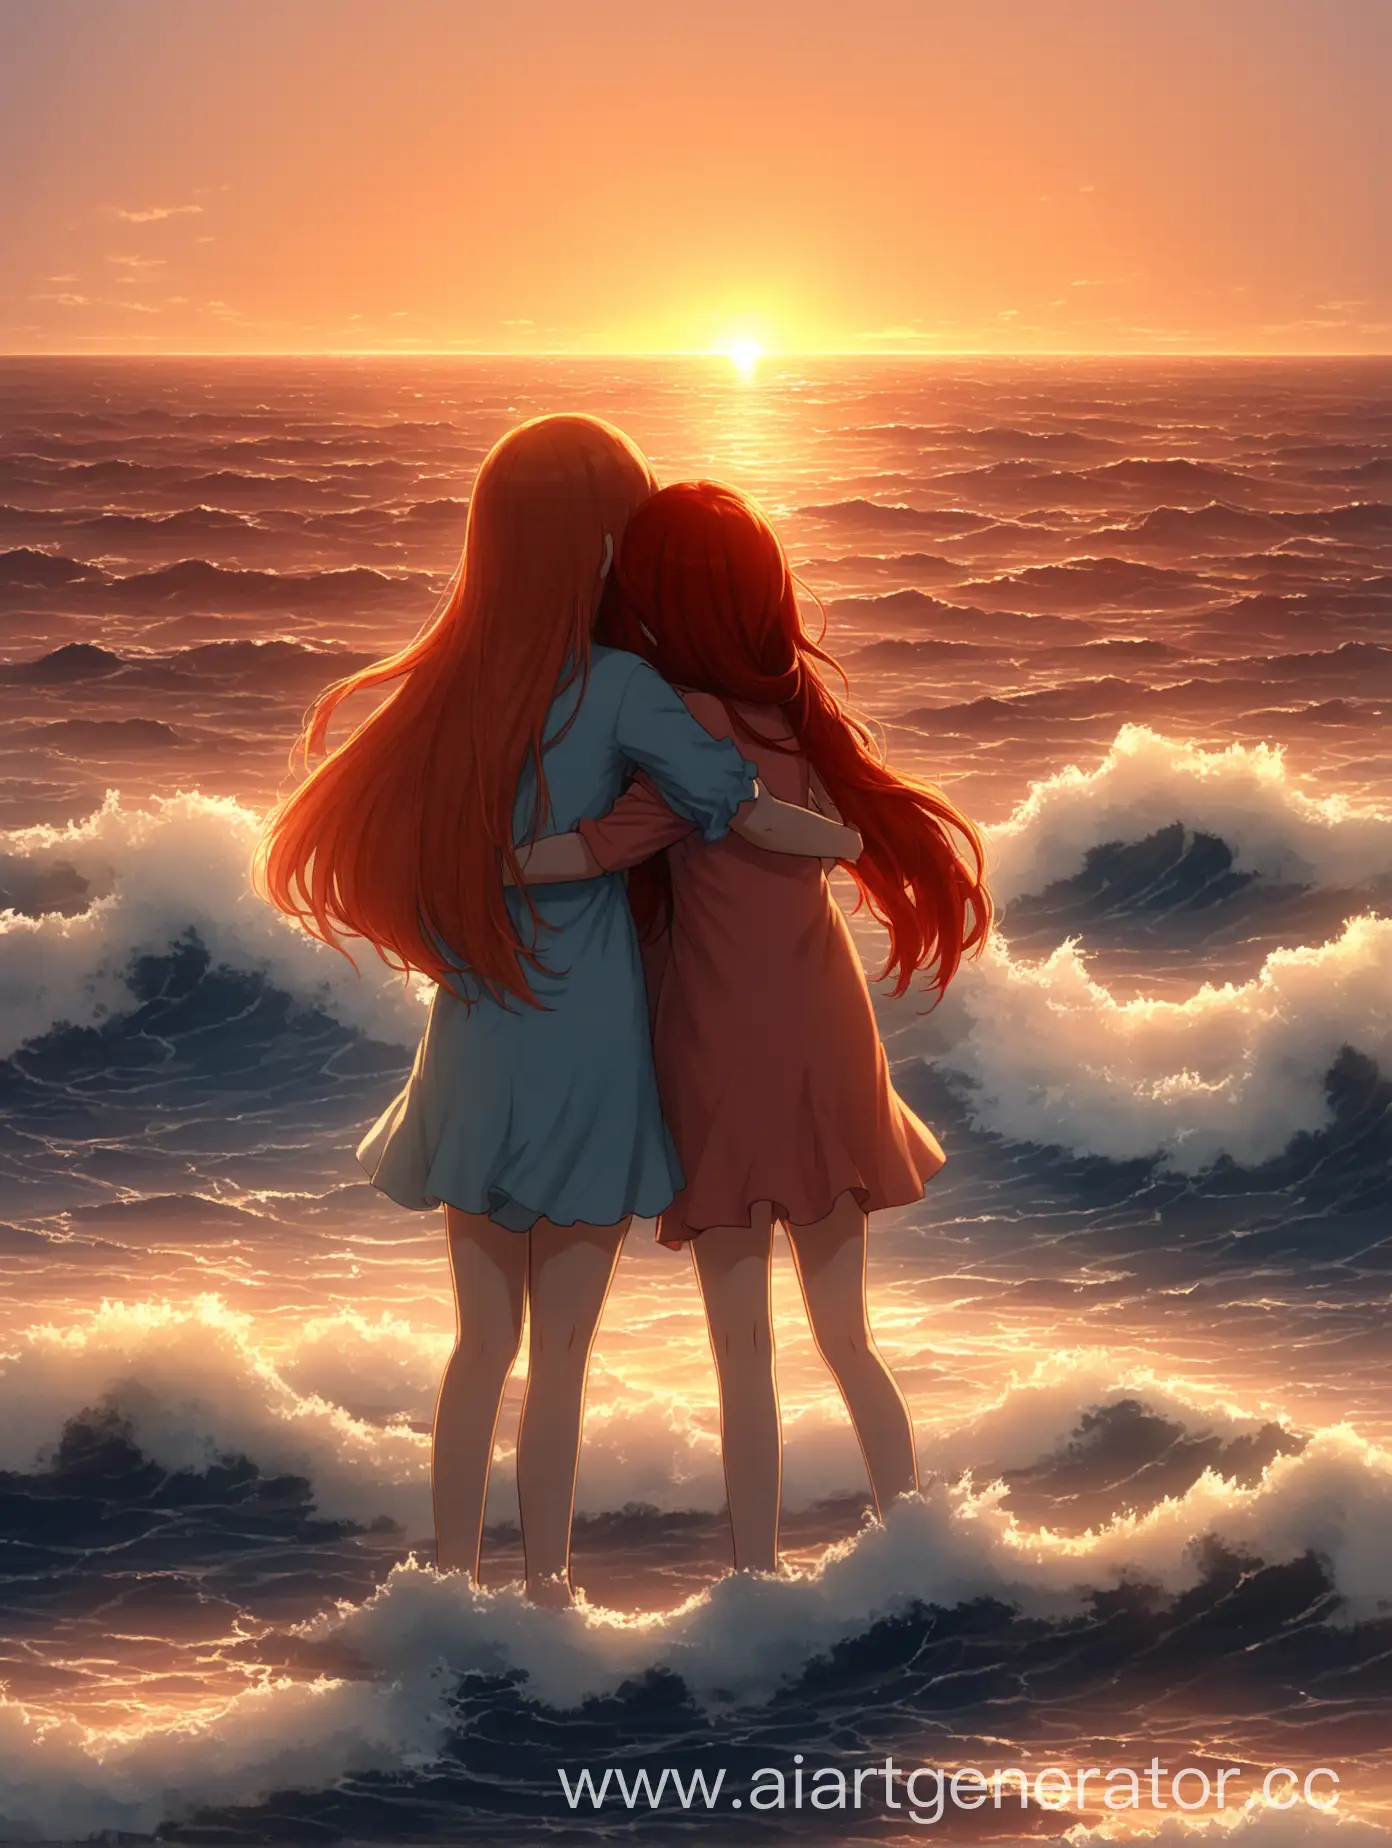 Sunset-Beach-Embrace-Redhaired-and-Chestnuthaired-Girls-Hugging-by-the-Sea